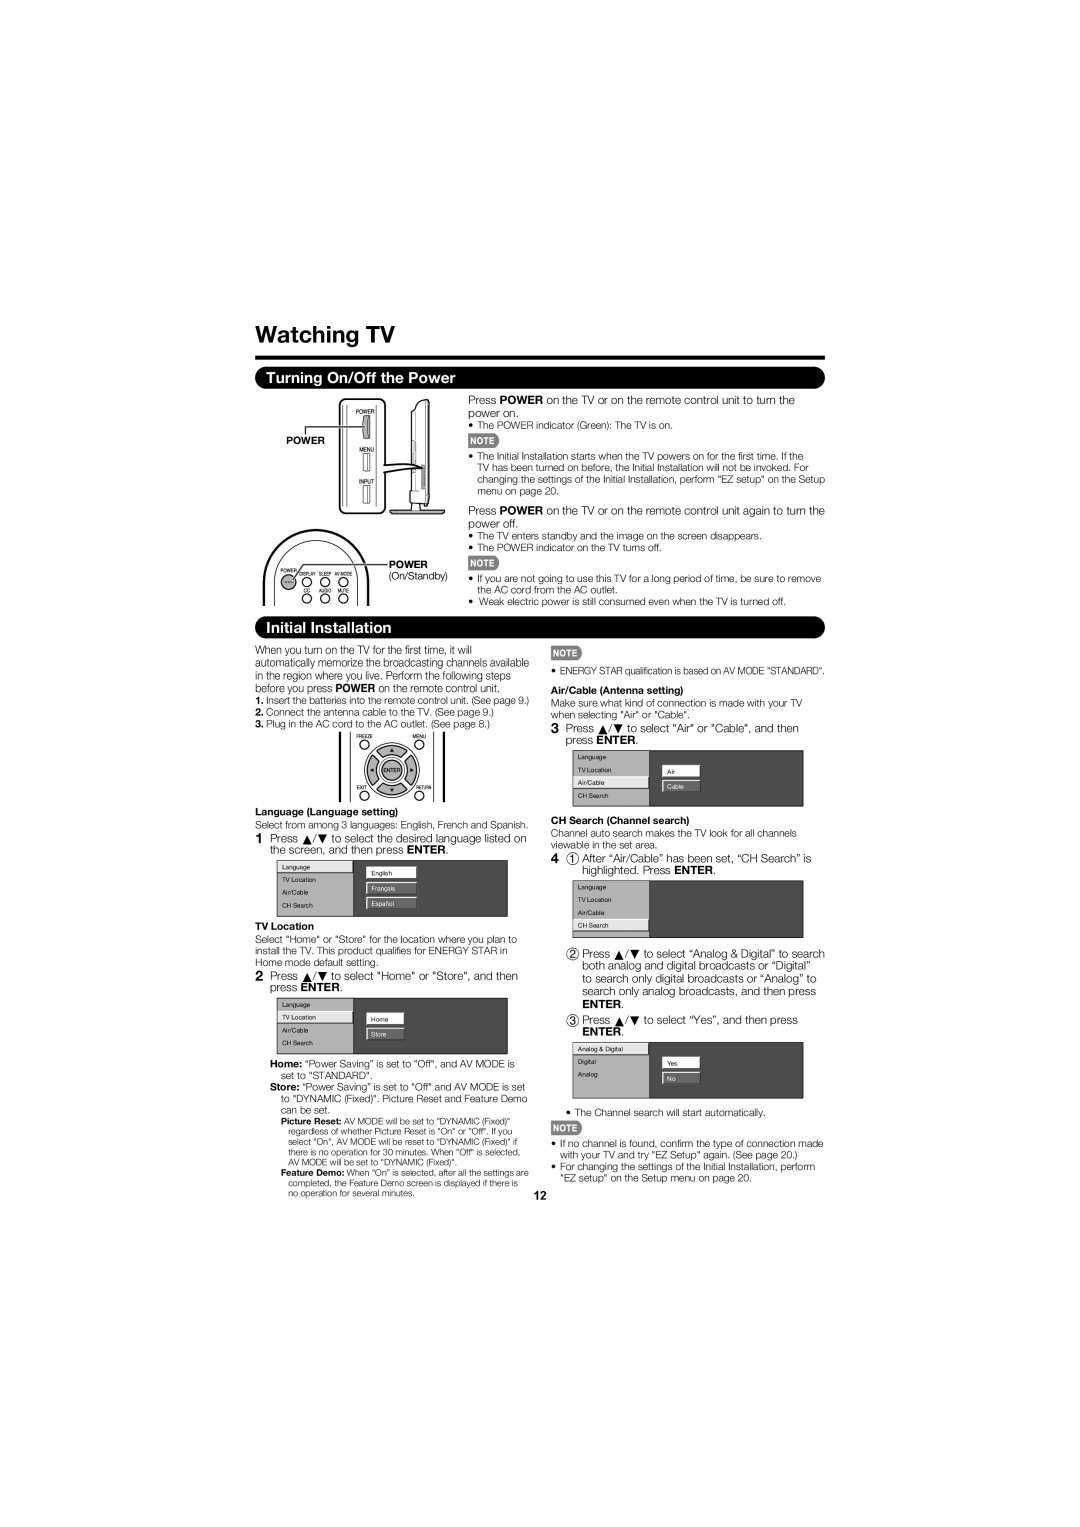 Sharp LC-40D78UN operation manual Watching TV, Turning On/Off the Power, Initial Installation, Enter 